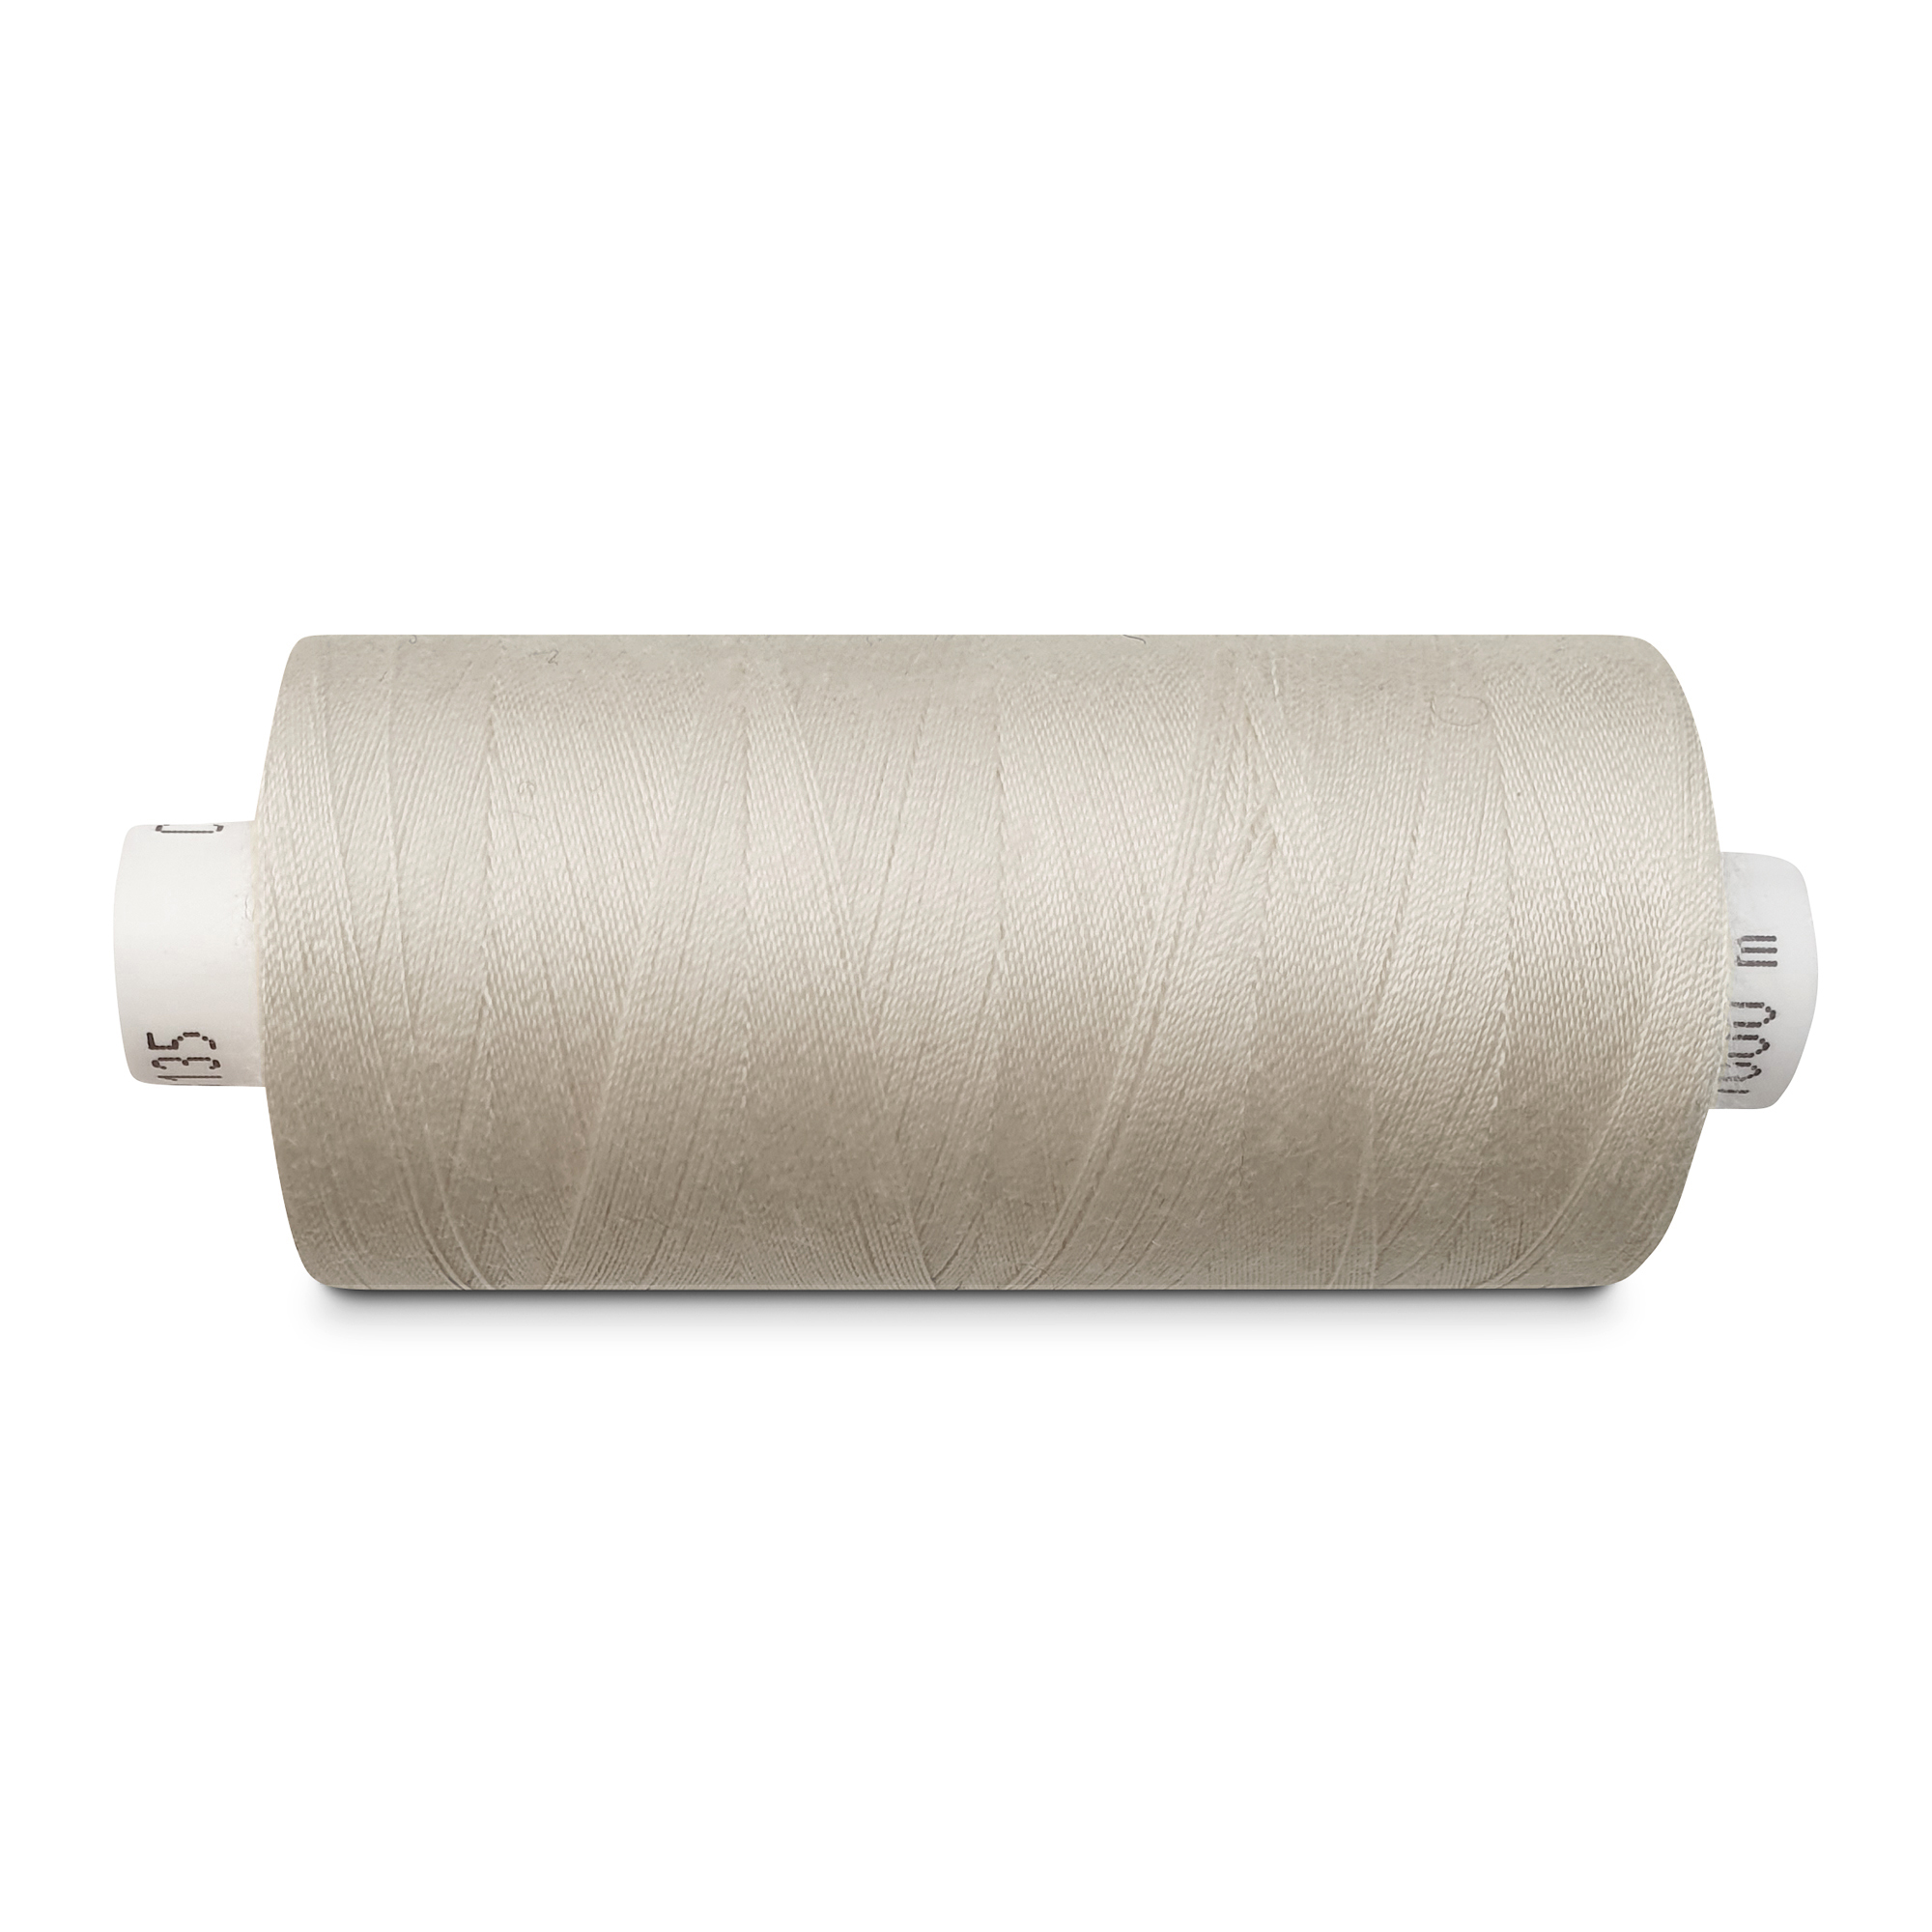 Leather/Sewing thread light beige